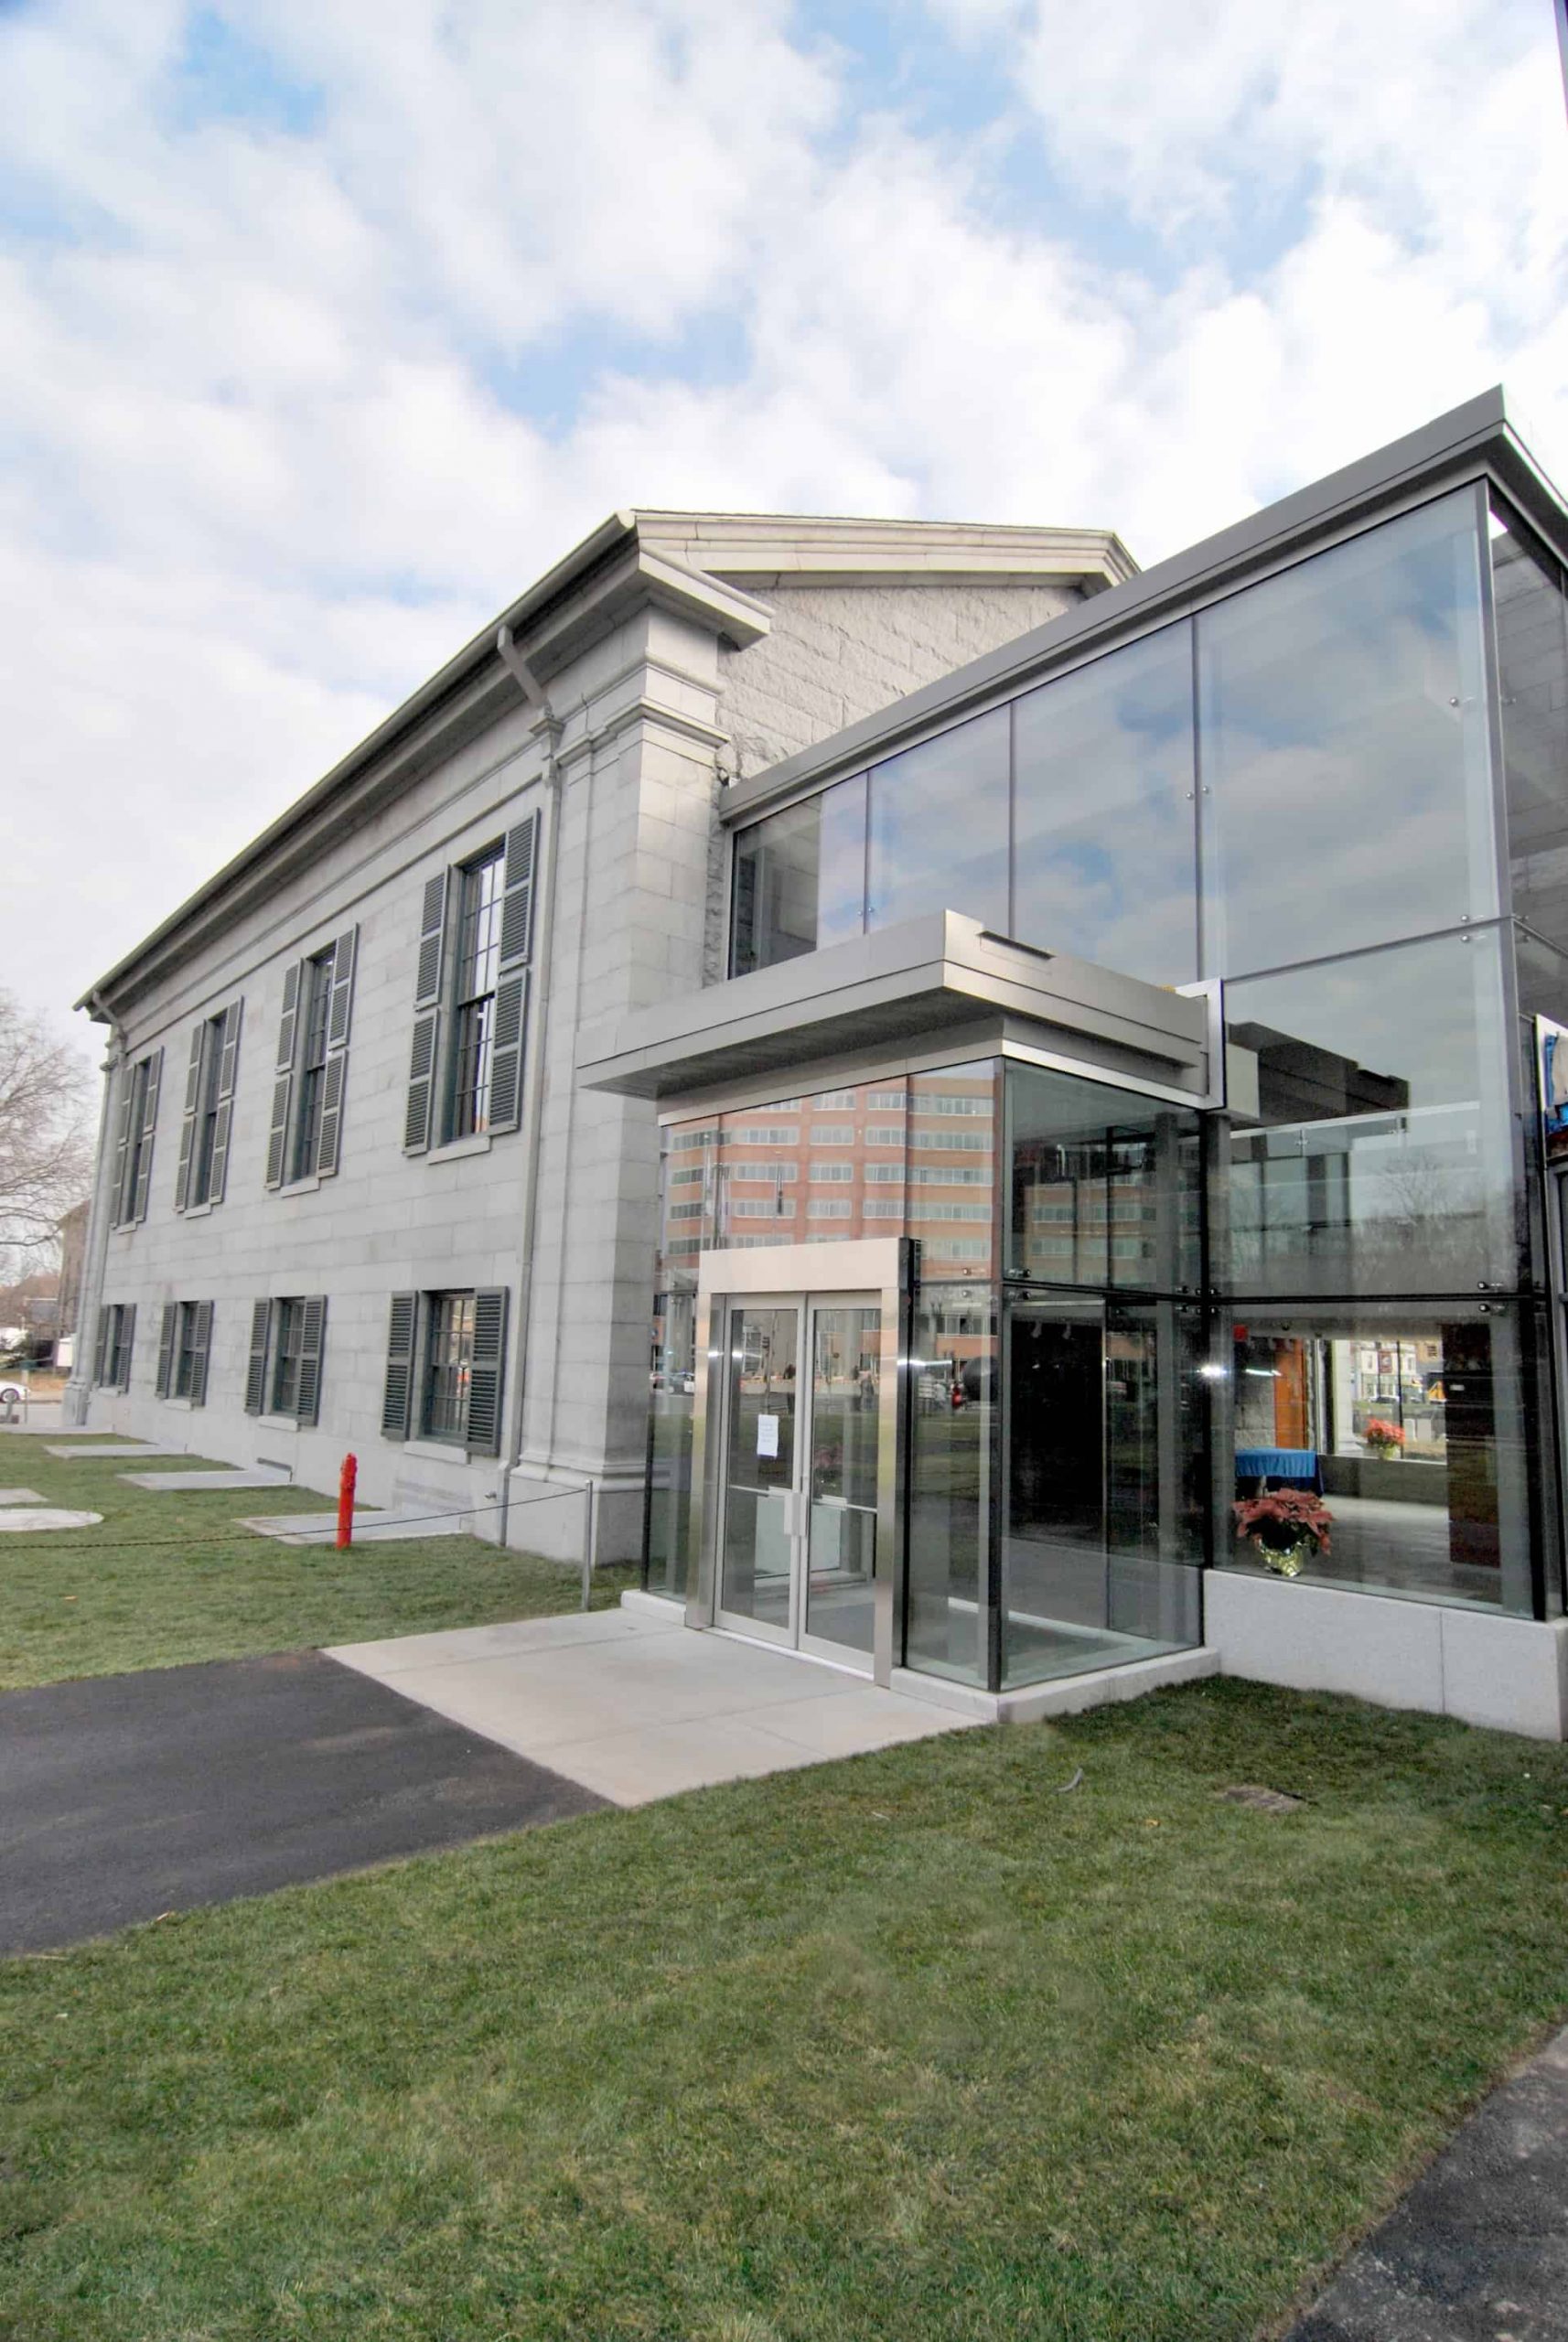 Completed Exterior Old City Hall with New Pilkington Framed Glass System Connecting Addition